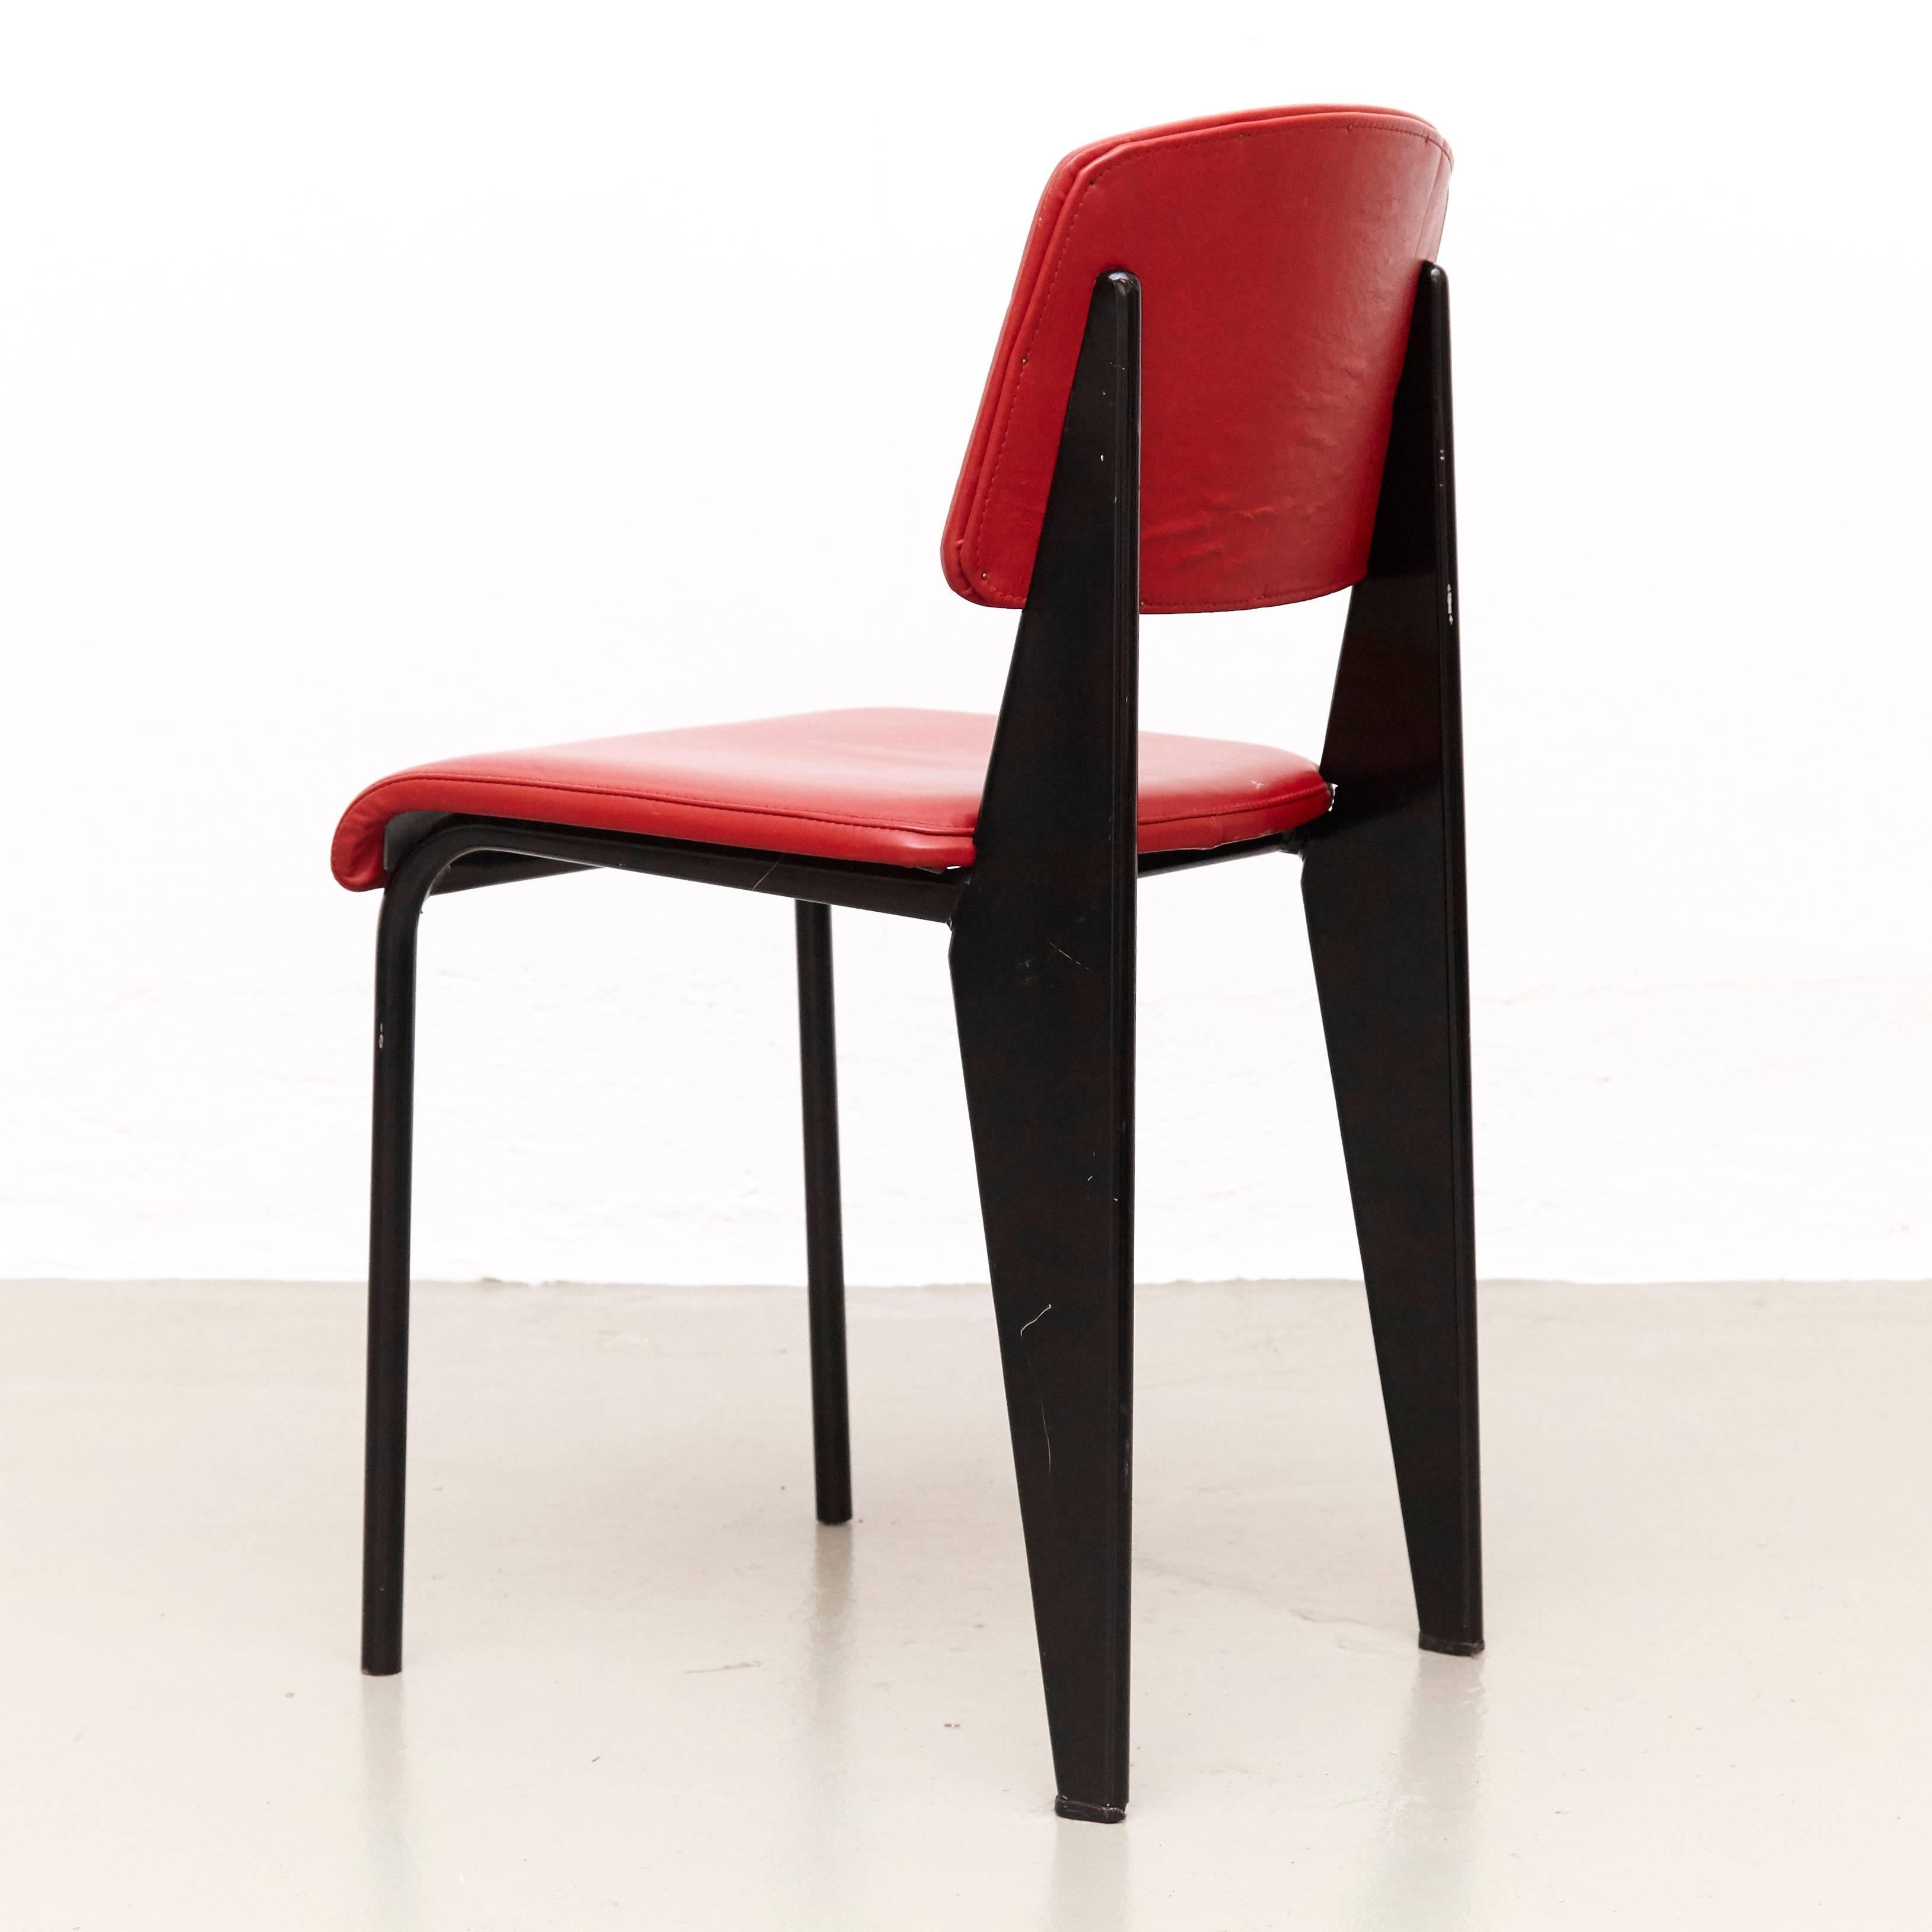 Standard chair designed by Jean Prouvé.
Manufactured by Ateliers Prouve, France, circa 1950.
Model 305 in wood, upholstered in red many years ago by the previous owner.

The Standard chair was commissioned for the Social Security meeting rooms